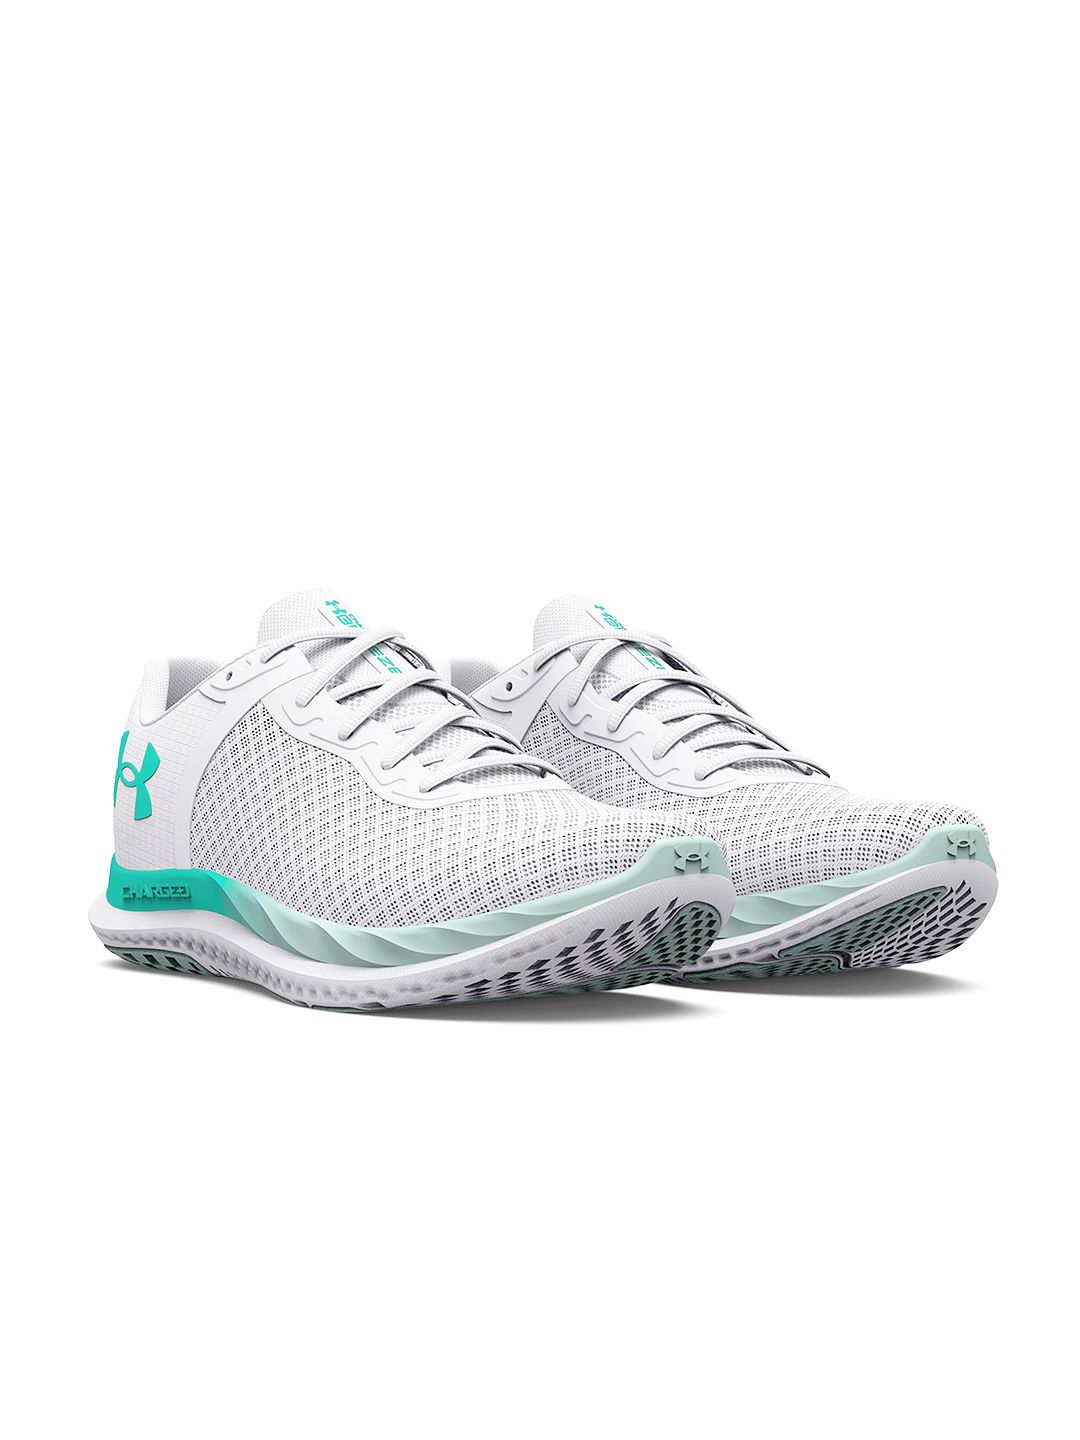 UNDER ARMOUR Women White Woven Design Charged Breeze Running Shoes Price in India